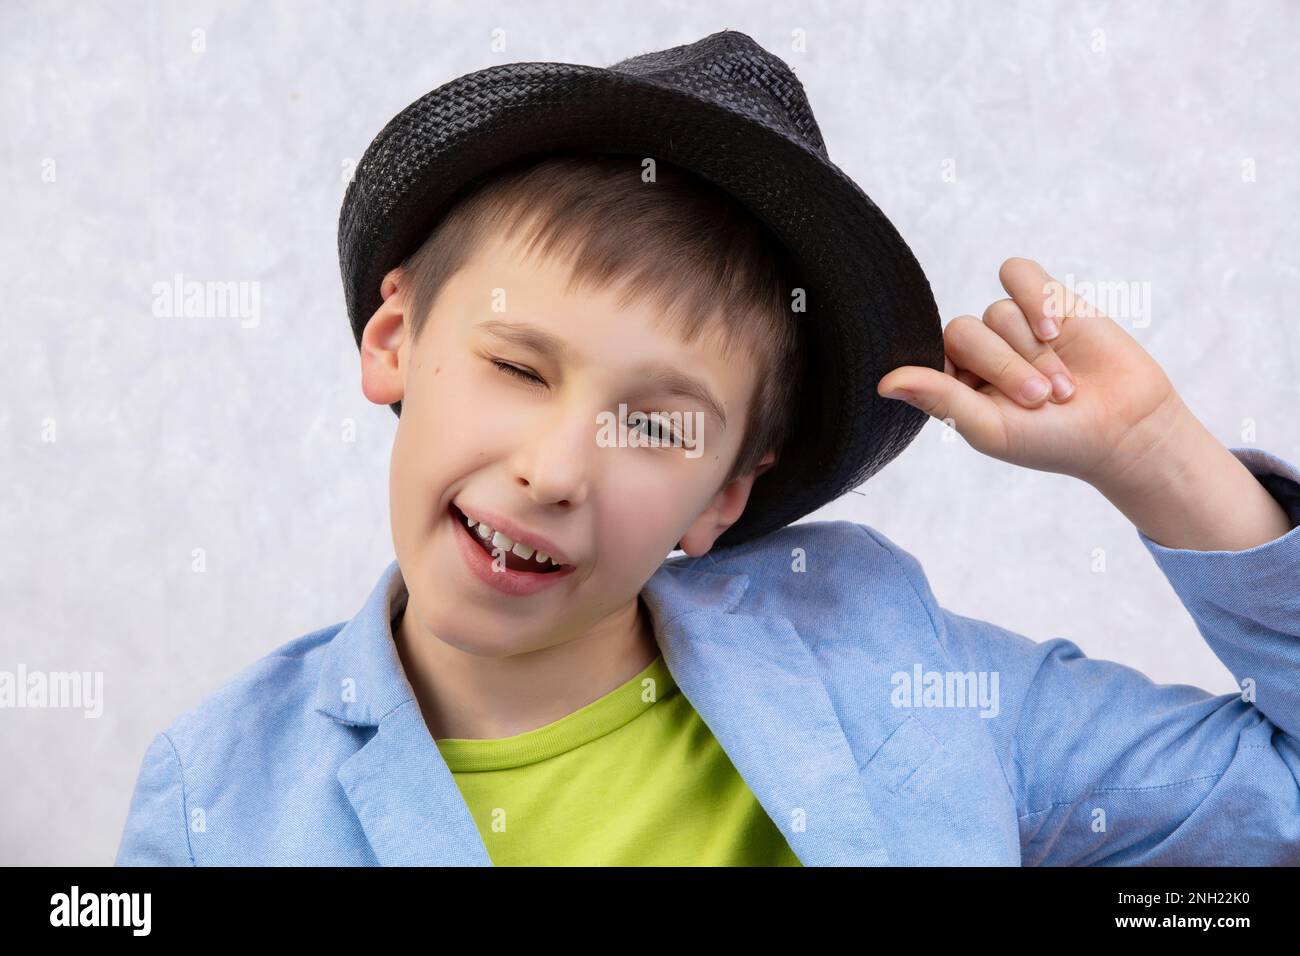 Portrait of a handsome cheerful winking boy in a hat. Stock Photo